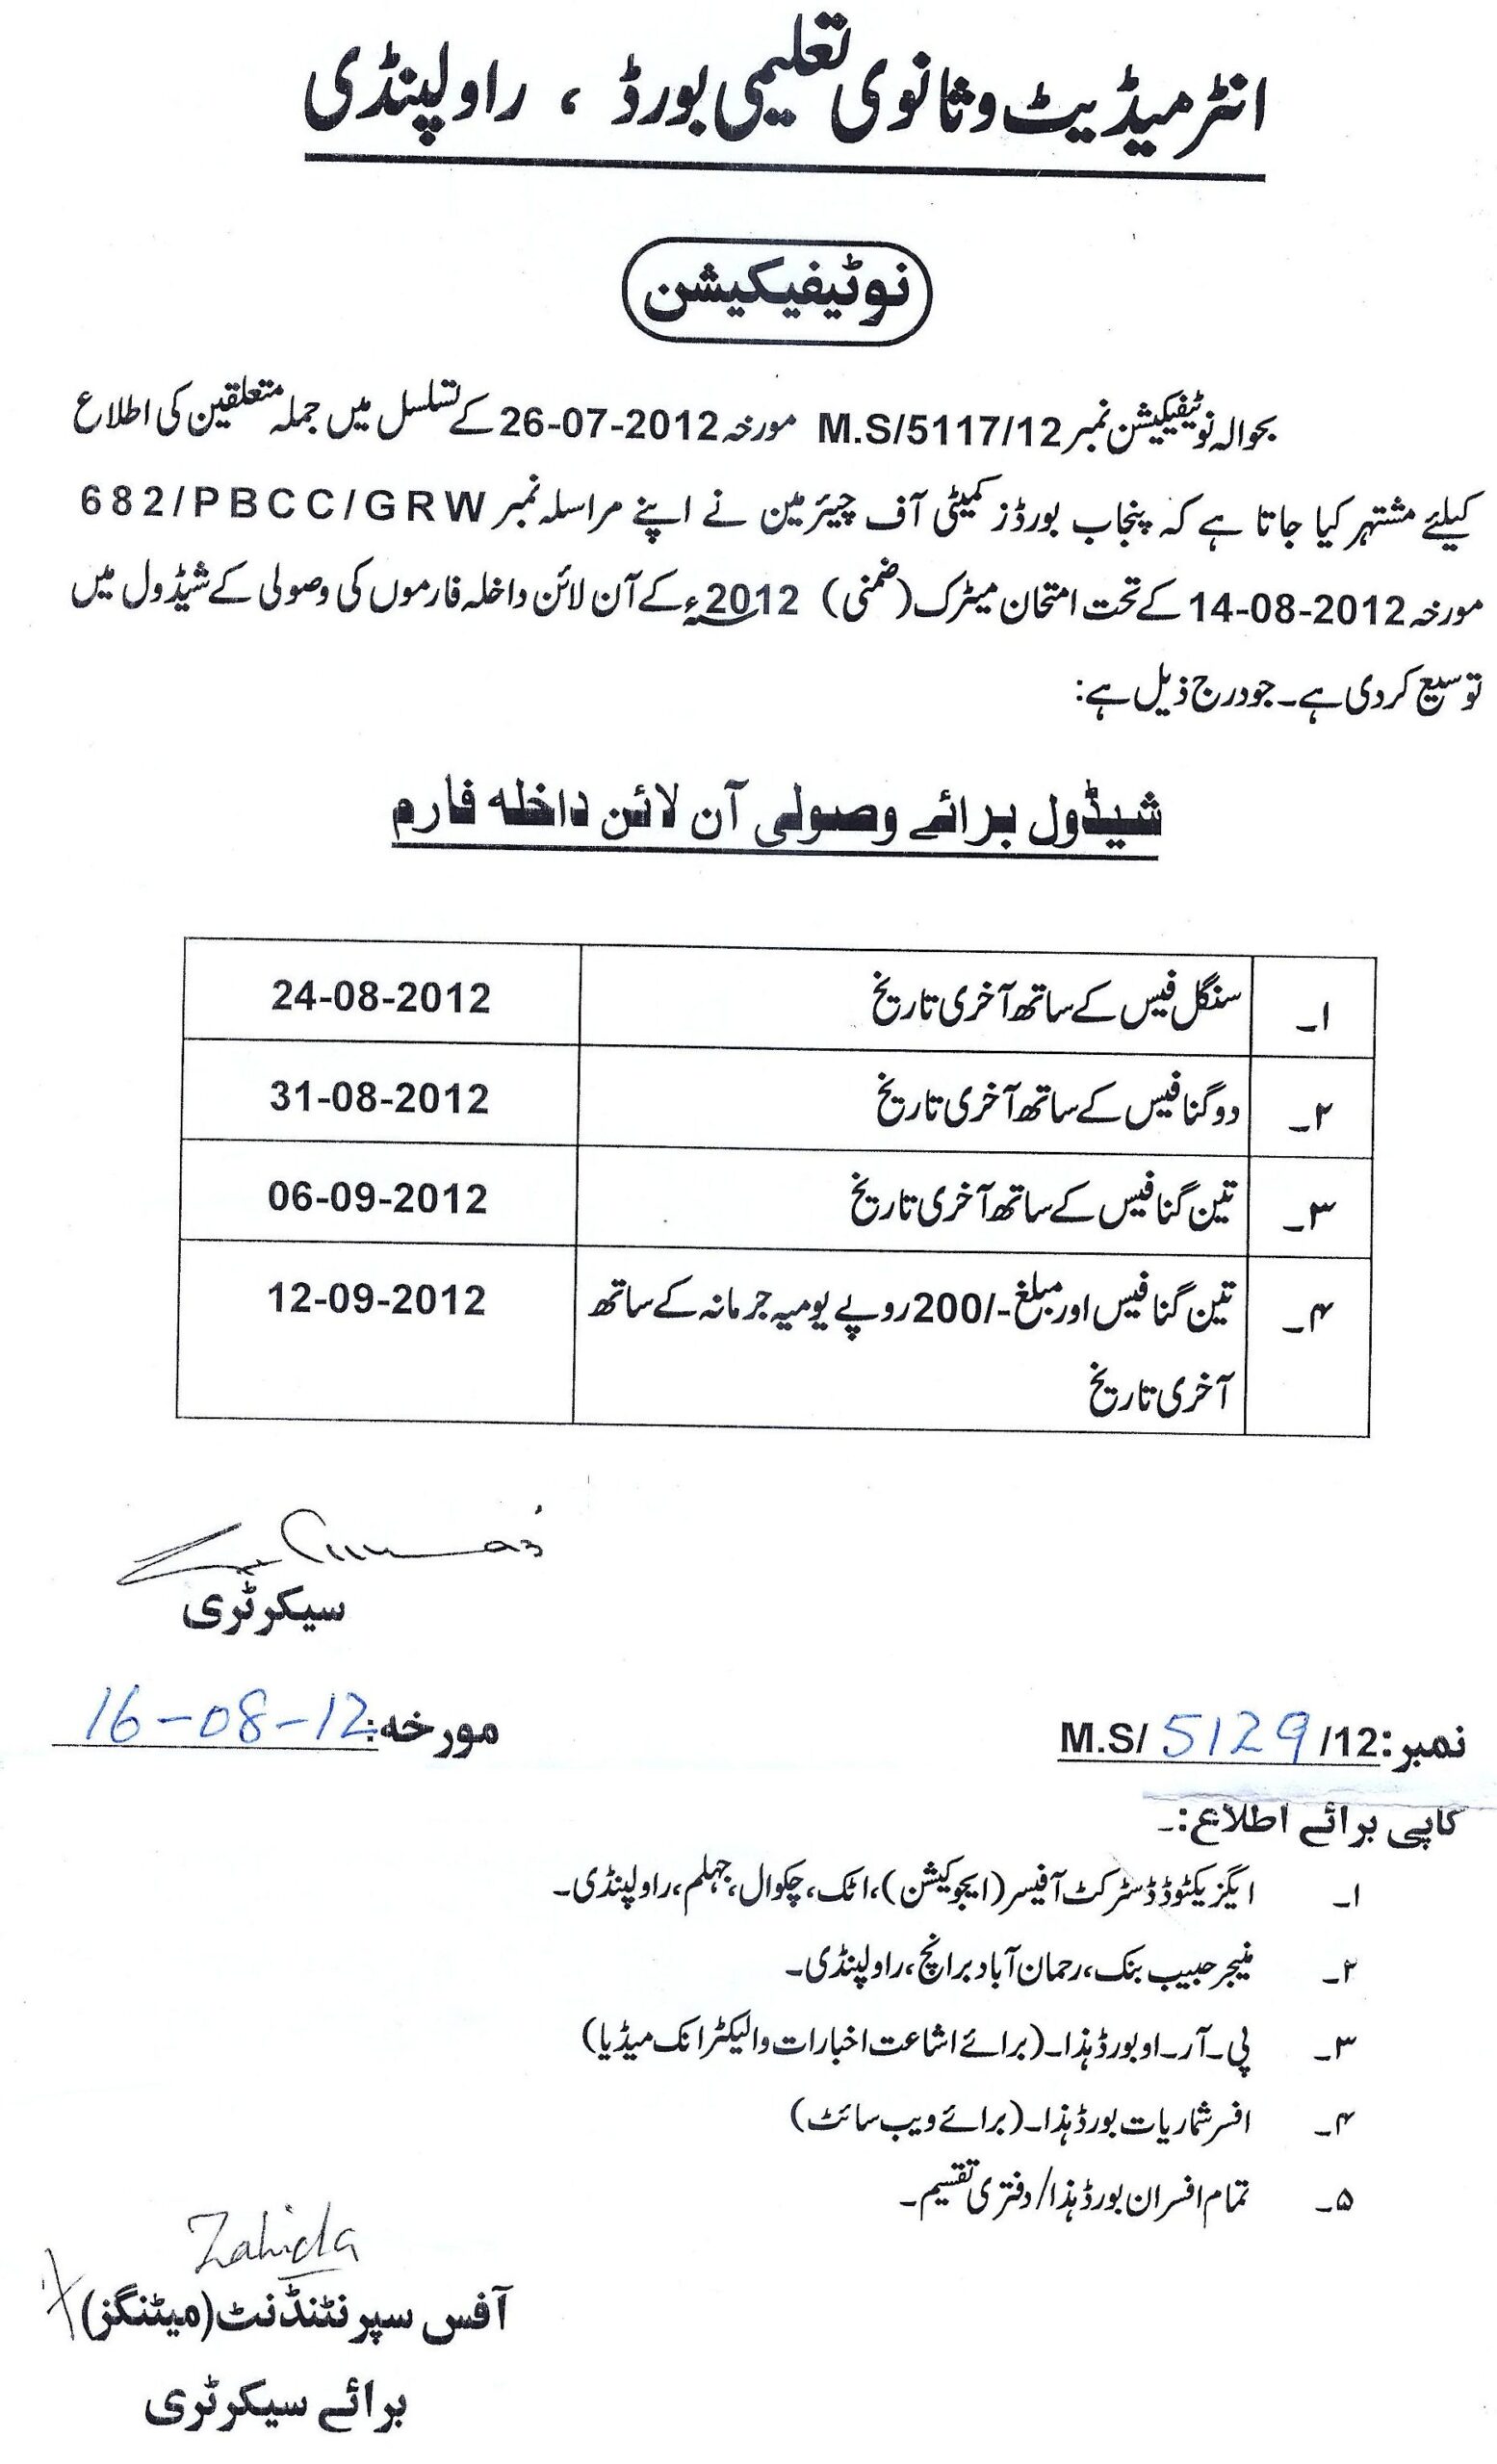 Rawalpindi Board Admission Date Matric Supply Exams 2012 Extends